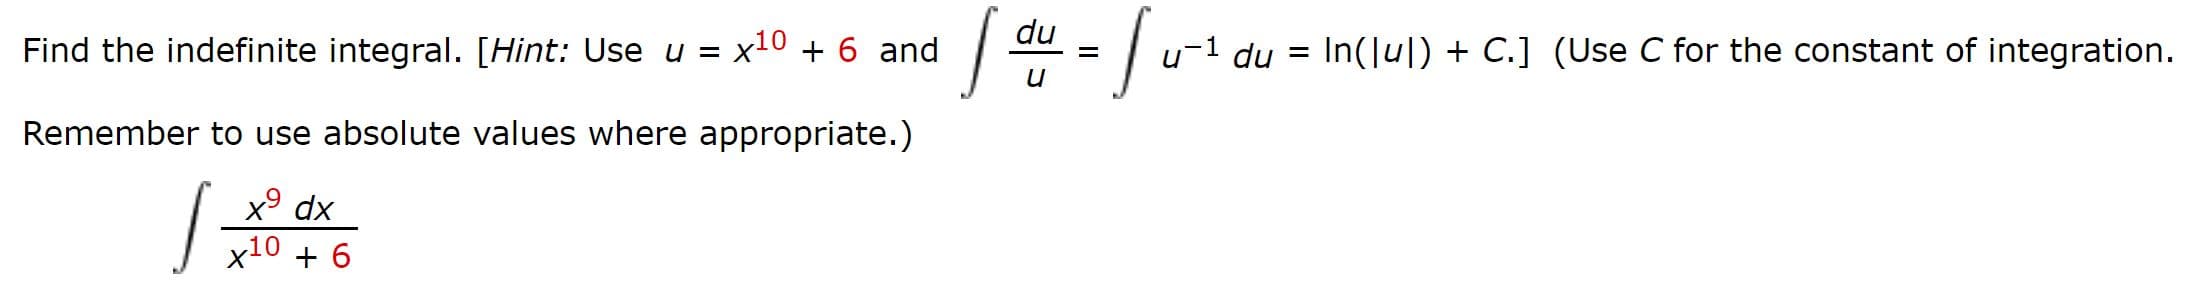 du
Find the indefinite integral. [Hint: Use u x10 +6 and
u 1 du In(lul)C.] (Use C for the constant of integration
Remember to use absolute values where appropriate.)
x9 dx
x10 6
